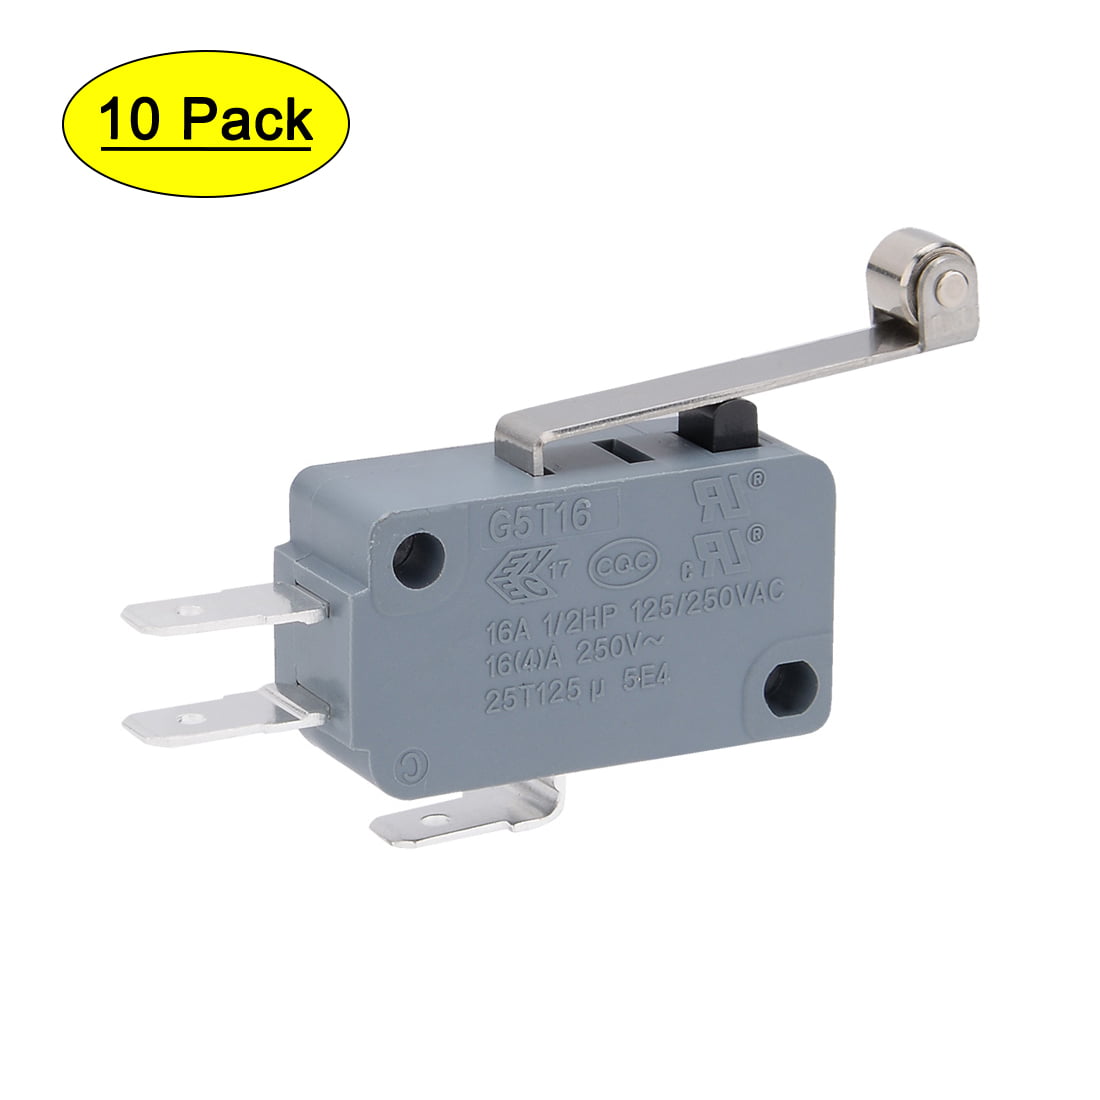 2Pcs Momentary Micro Limit Switch 3-16A 250VAC Long Hinge Roller Arm SPDT Snap Action LOT 